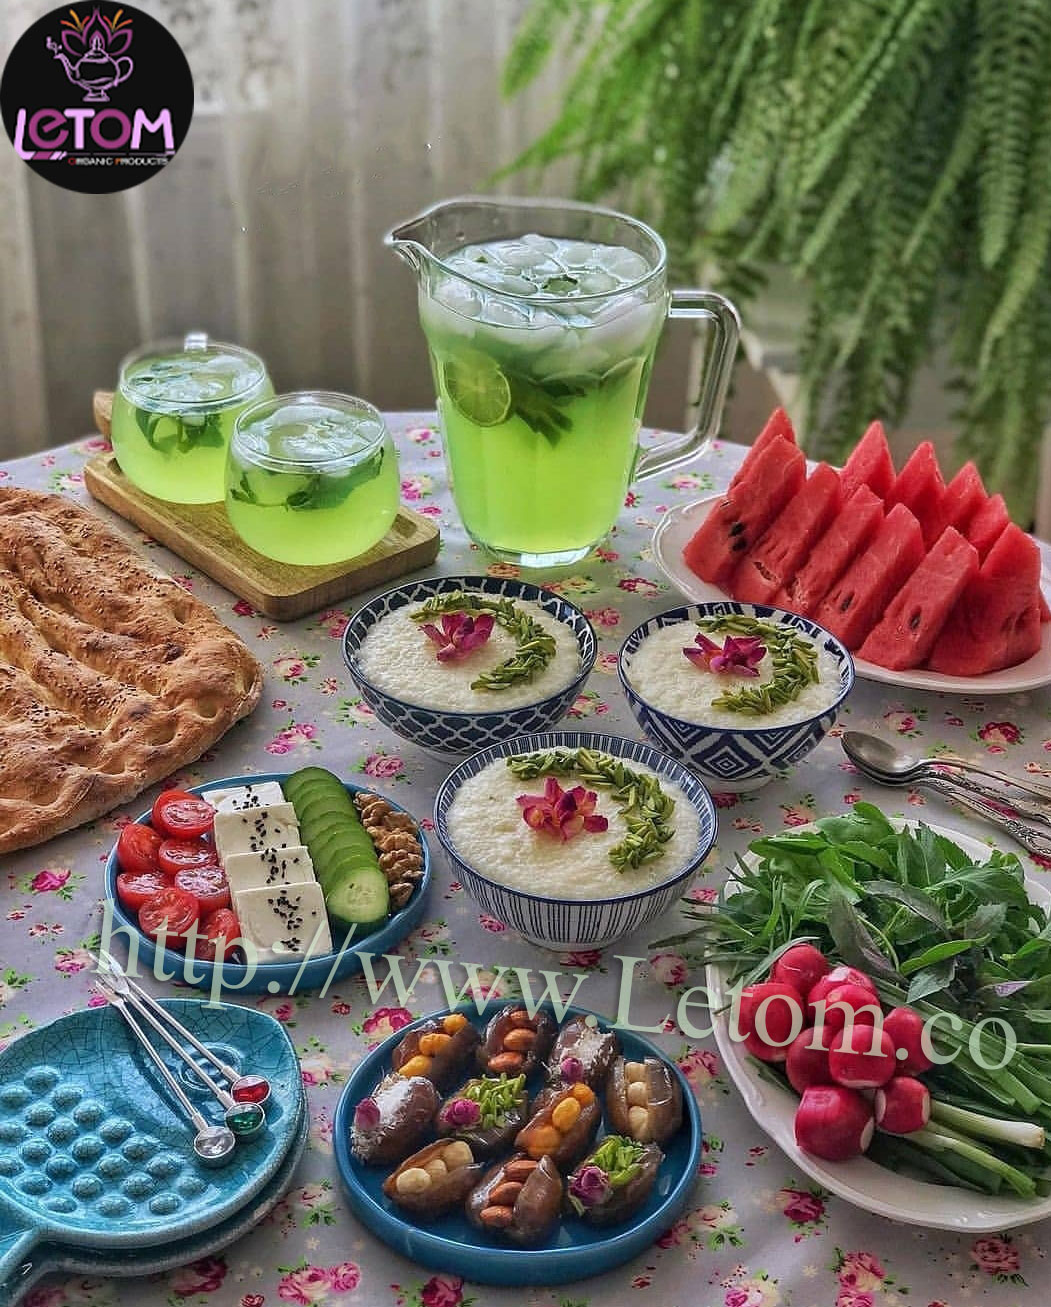 A table full of healthy foods and vegetables in the Rose Tea article